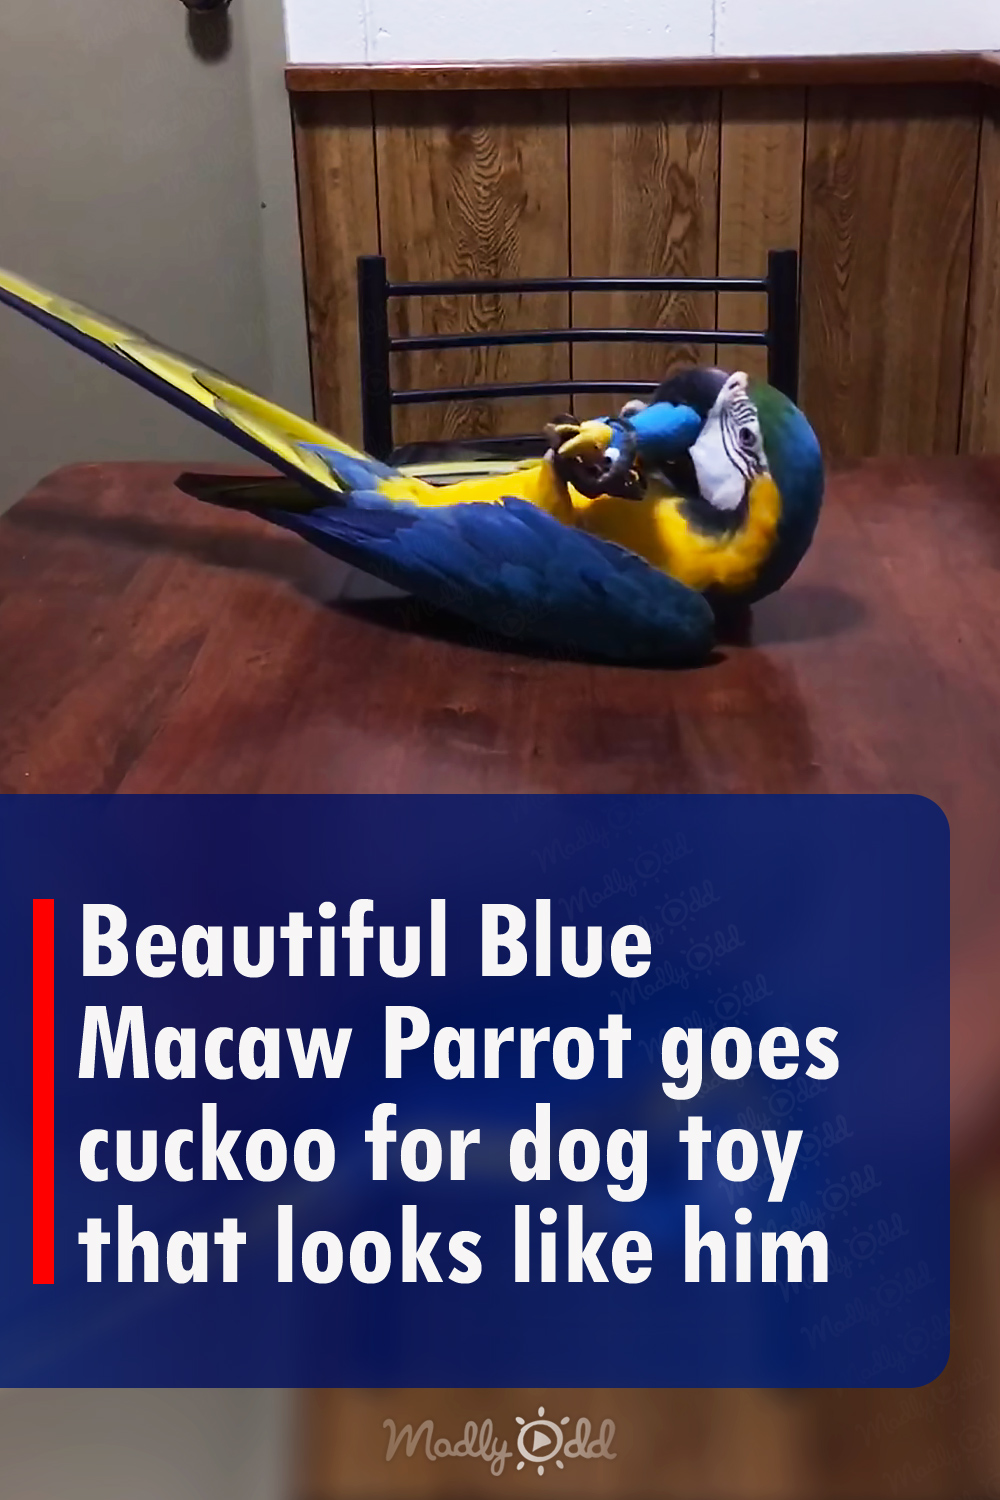 Beautiful Blue Macaw Parrot goes cuckoo for dog toy that looks like him